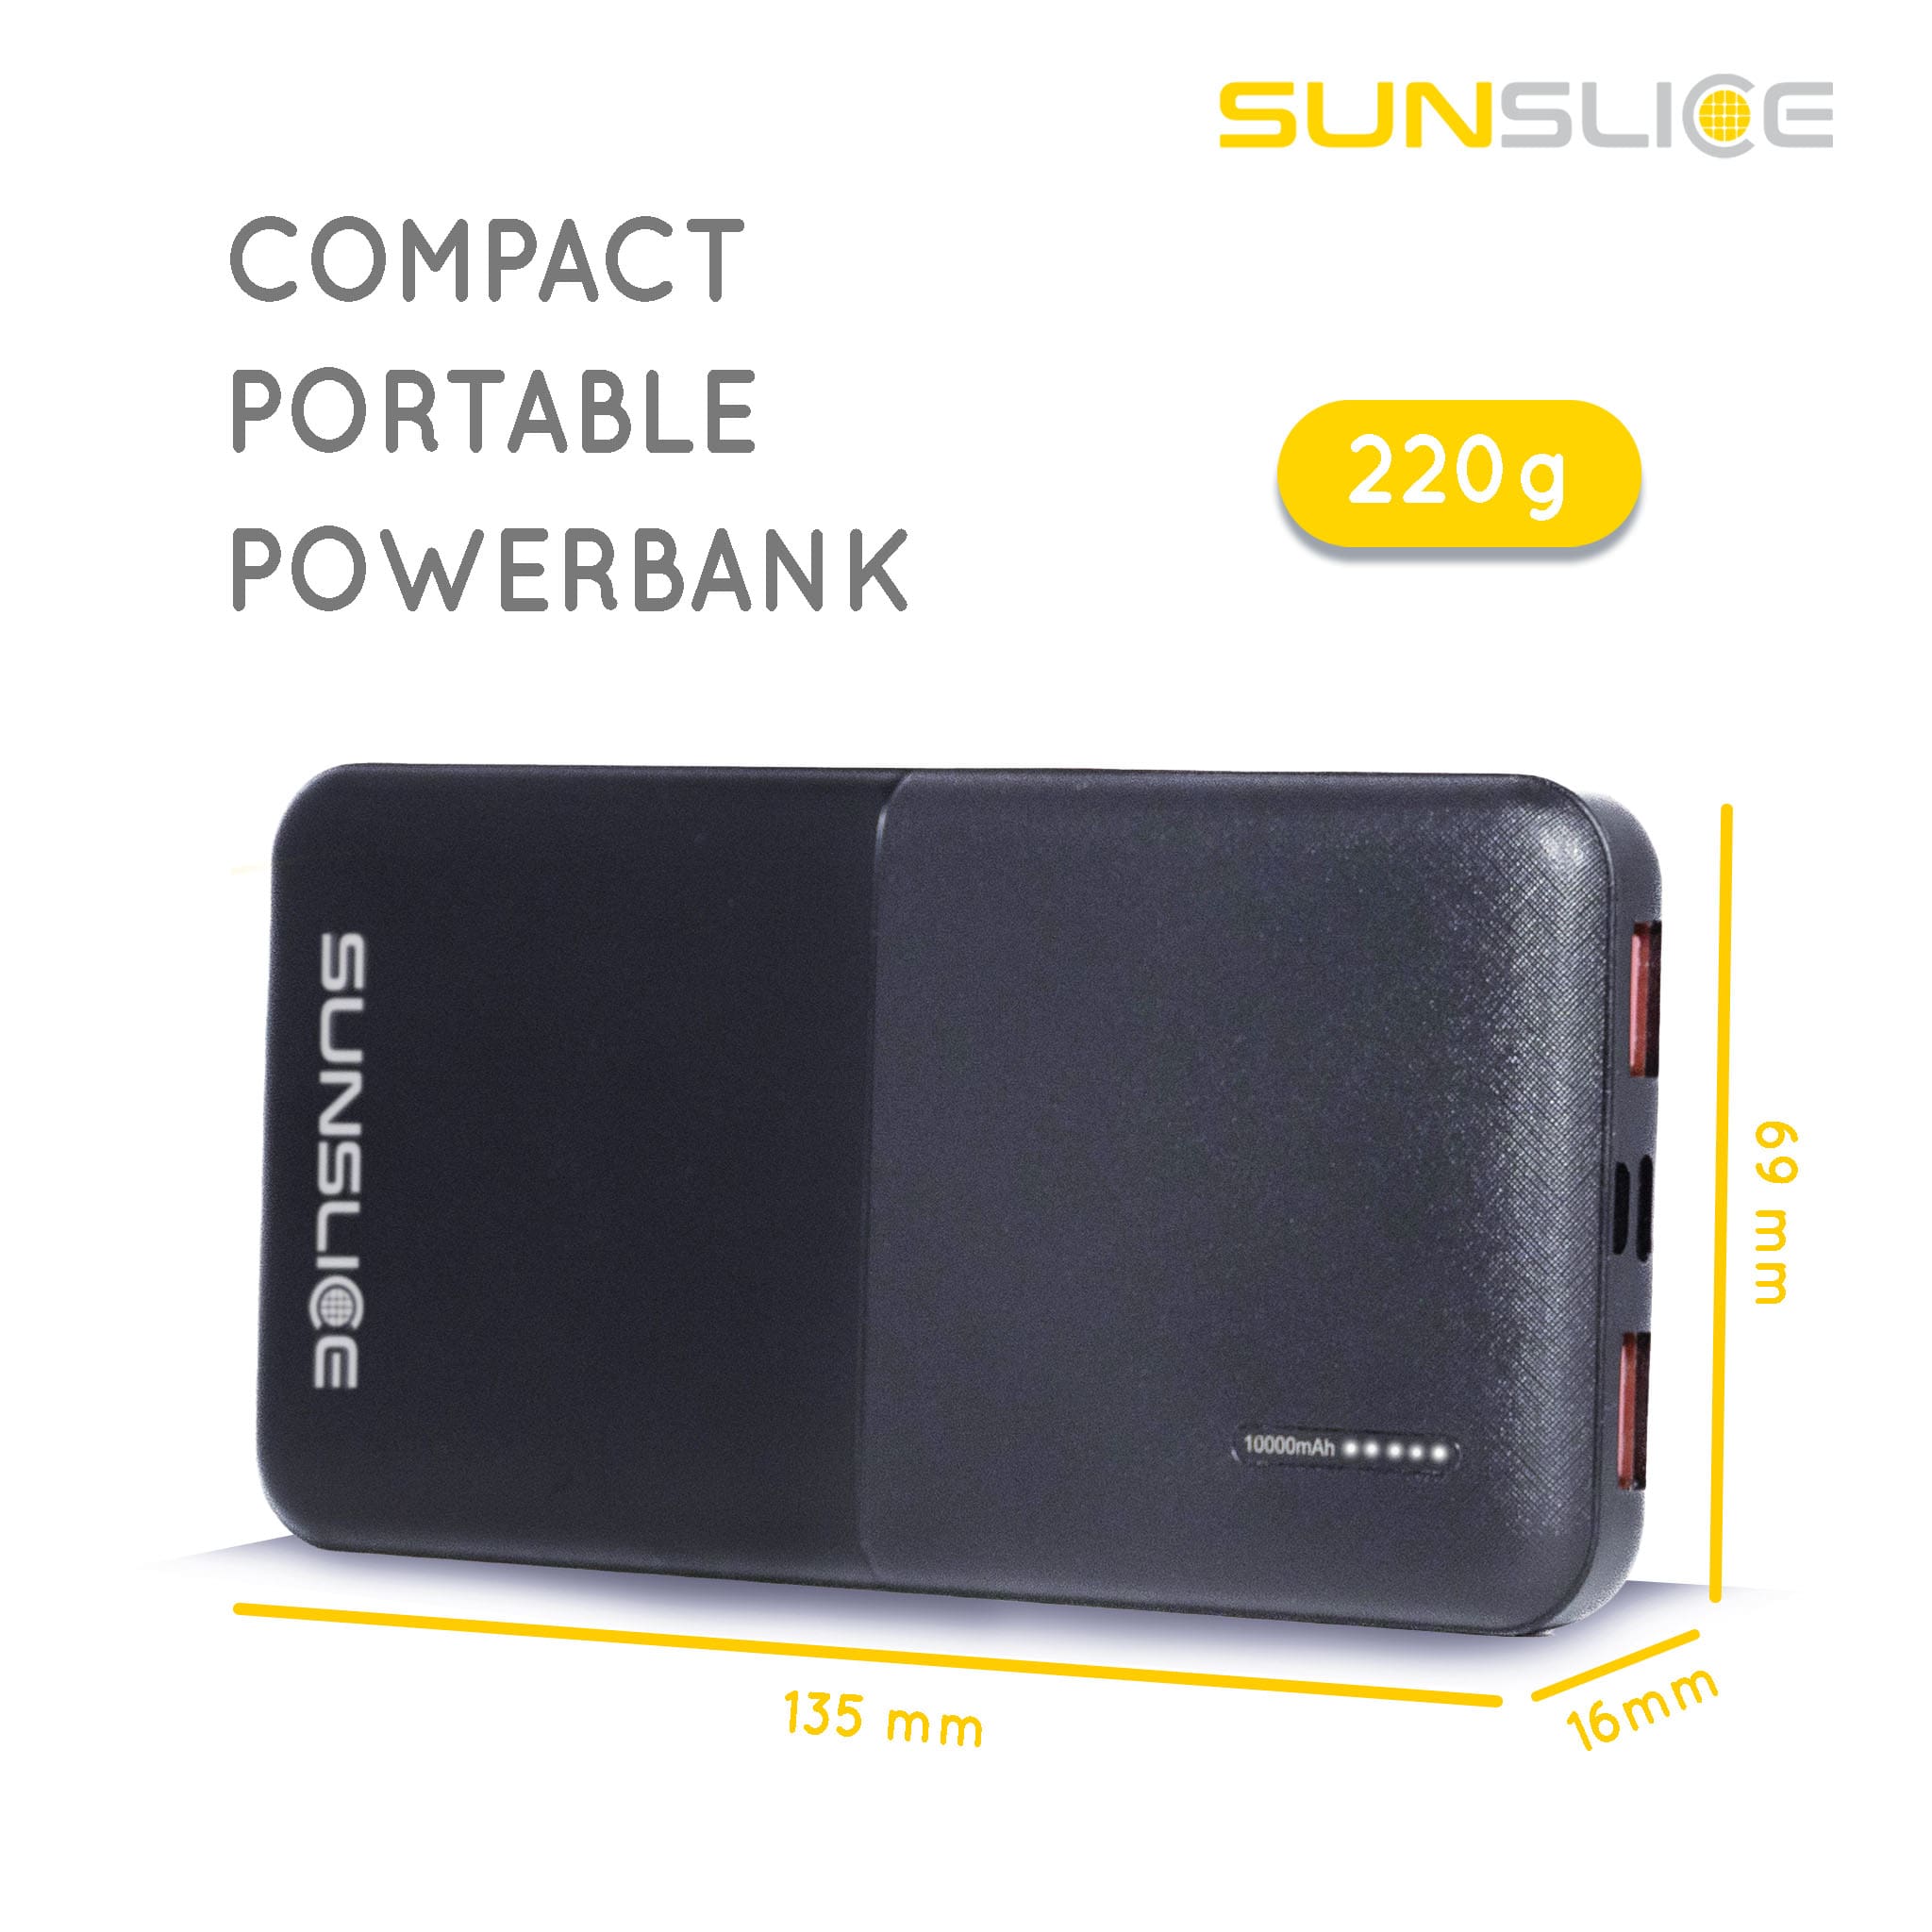 Power bank (Gravity 10) Compact and portable. Size: 135 mm, 69 mm, 16 mm. Wieght: 220g